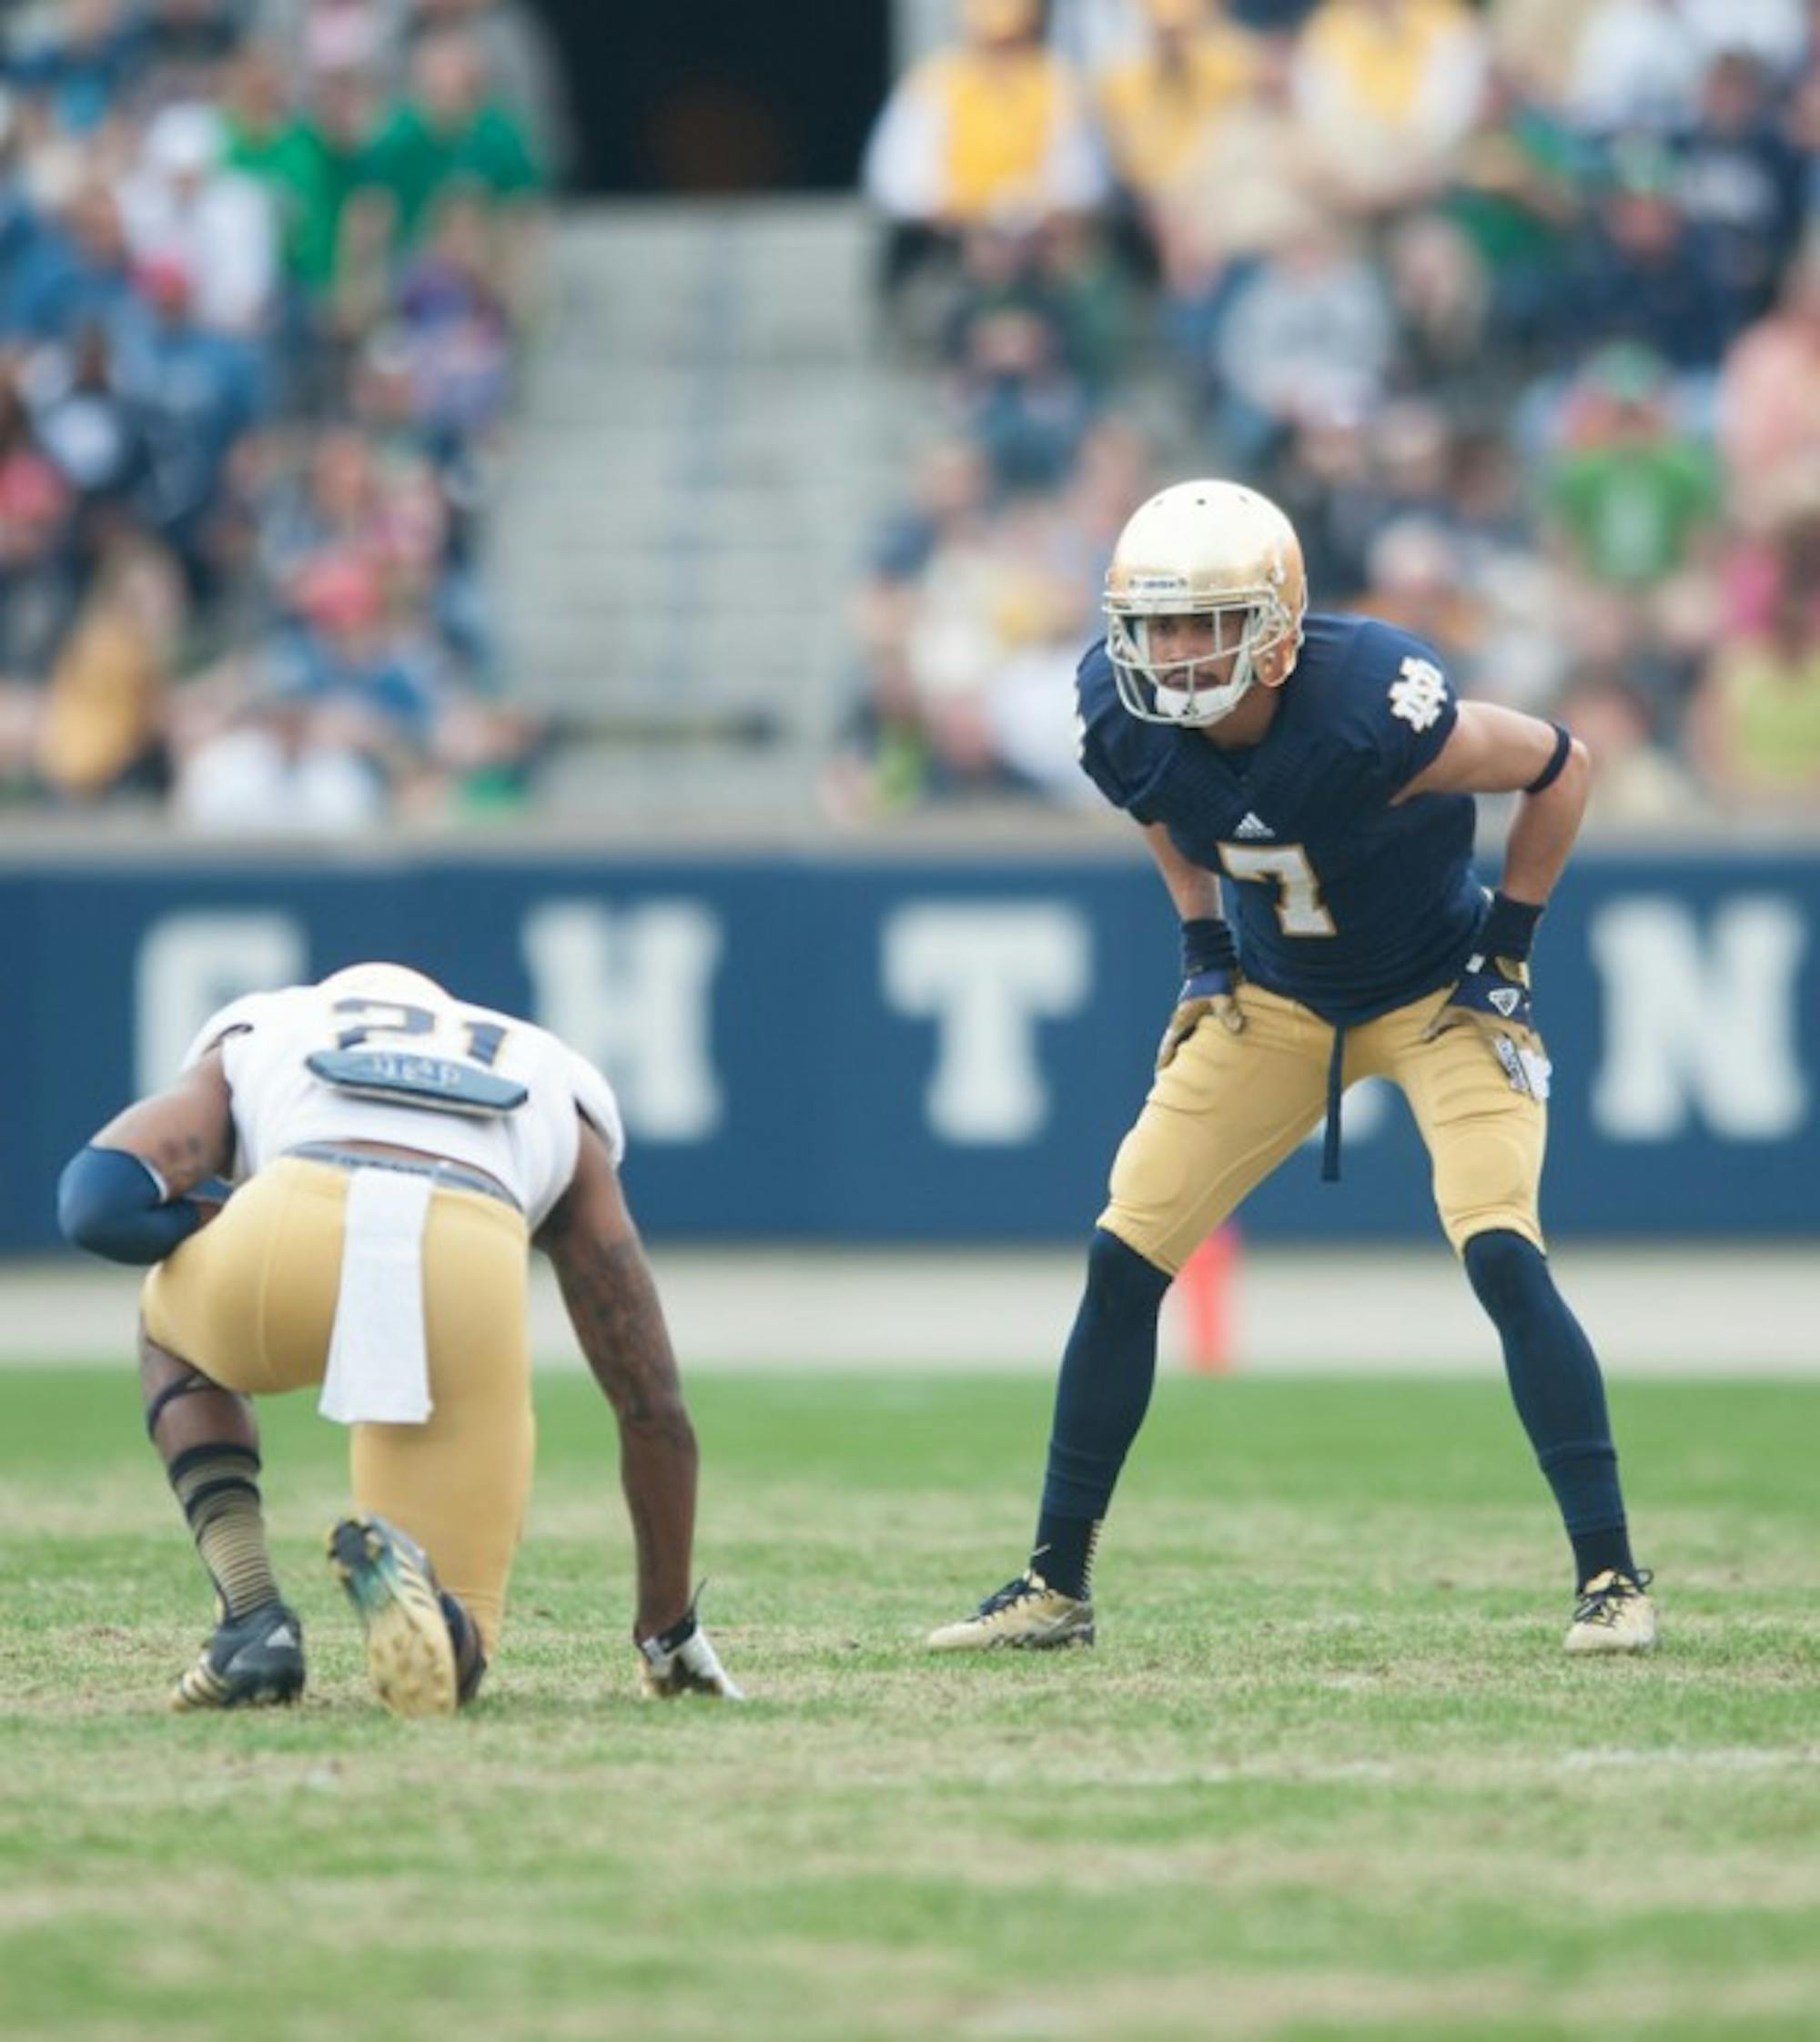 Sophomore receiver Will Fuller lines up opposite senior cornerback Jalen Brown during the Blue-Gold Game on Saturday. Fuller is part of a young receiving corps set to have a breakout 2014 season for the Irish.